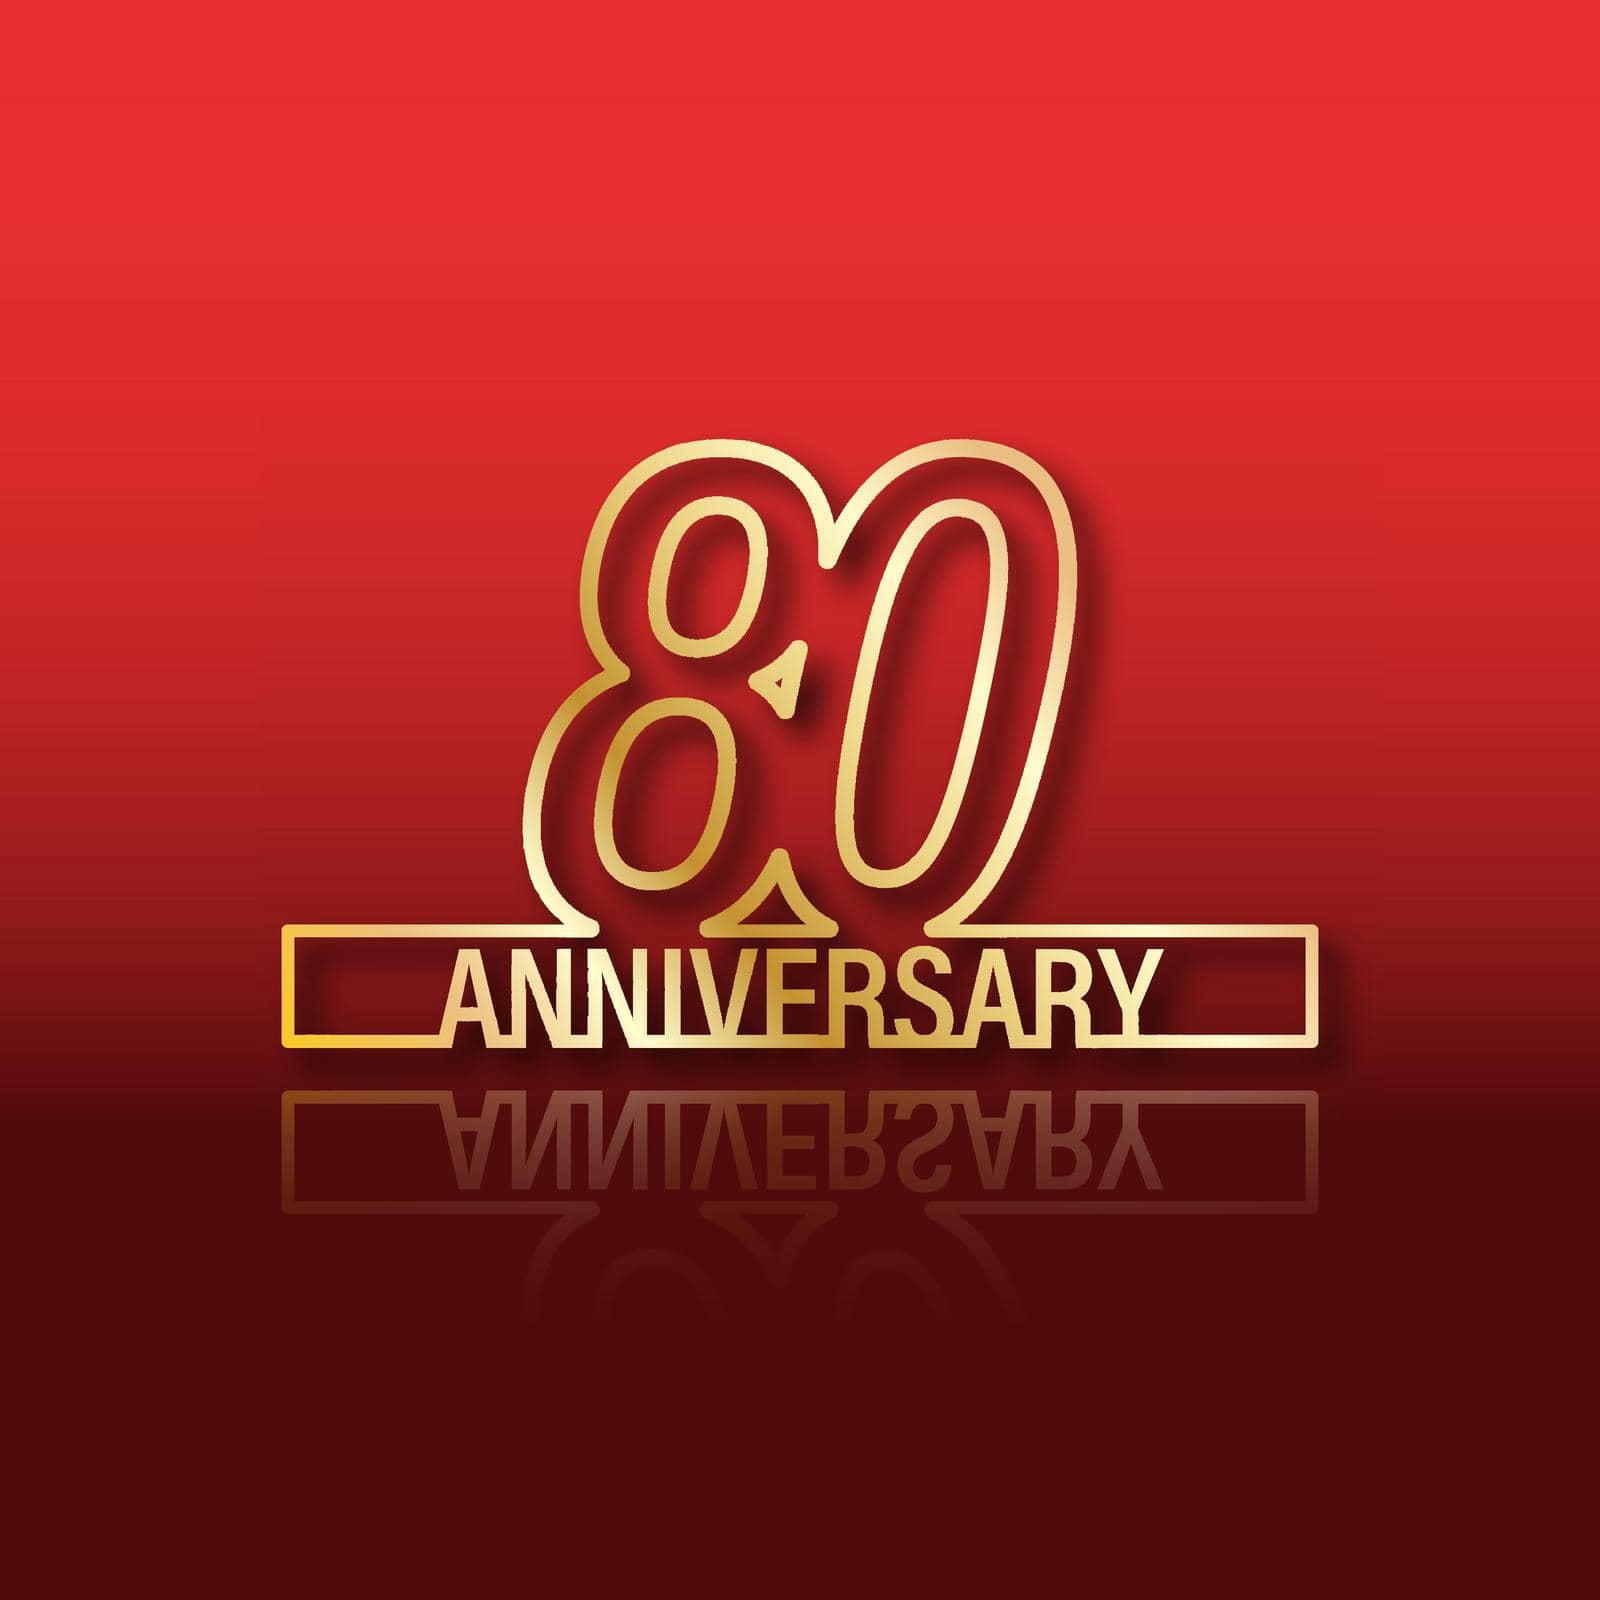 80 anniversary. Stylized gold lettering with reflection on a red gradient background. Vector illustration